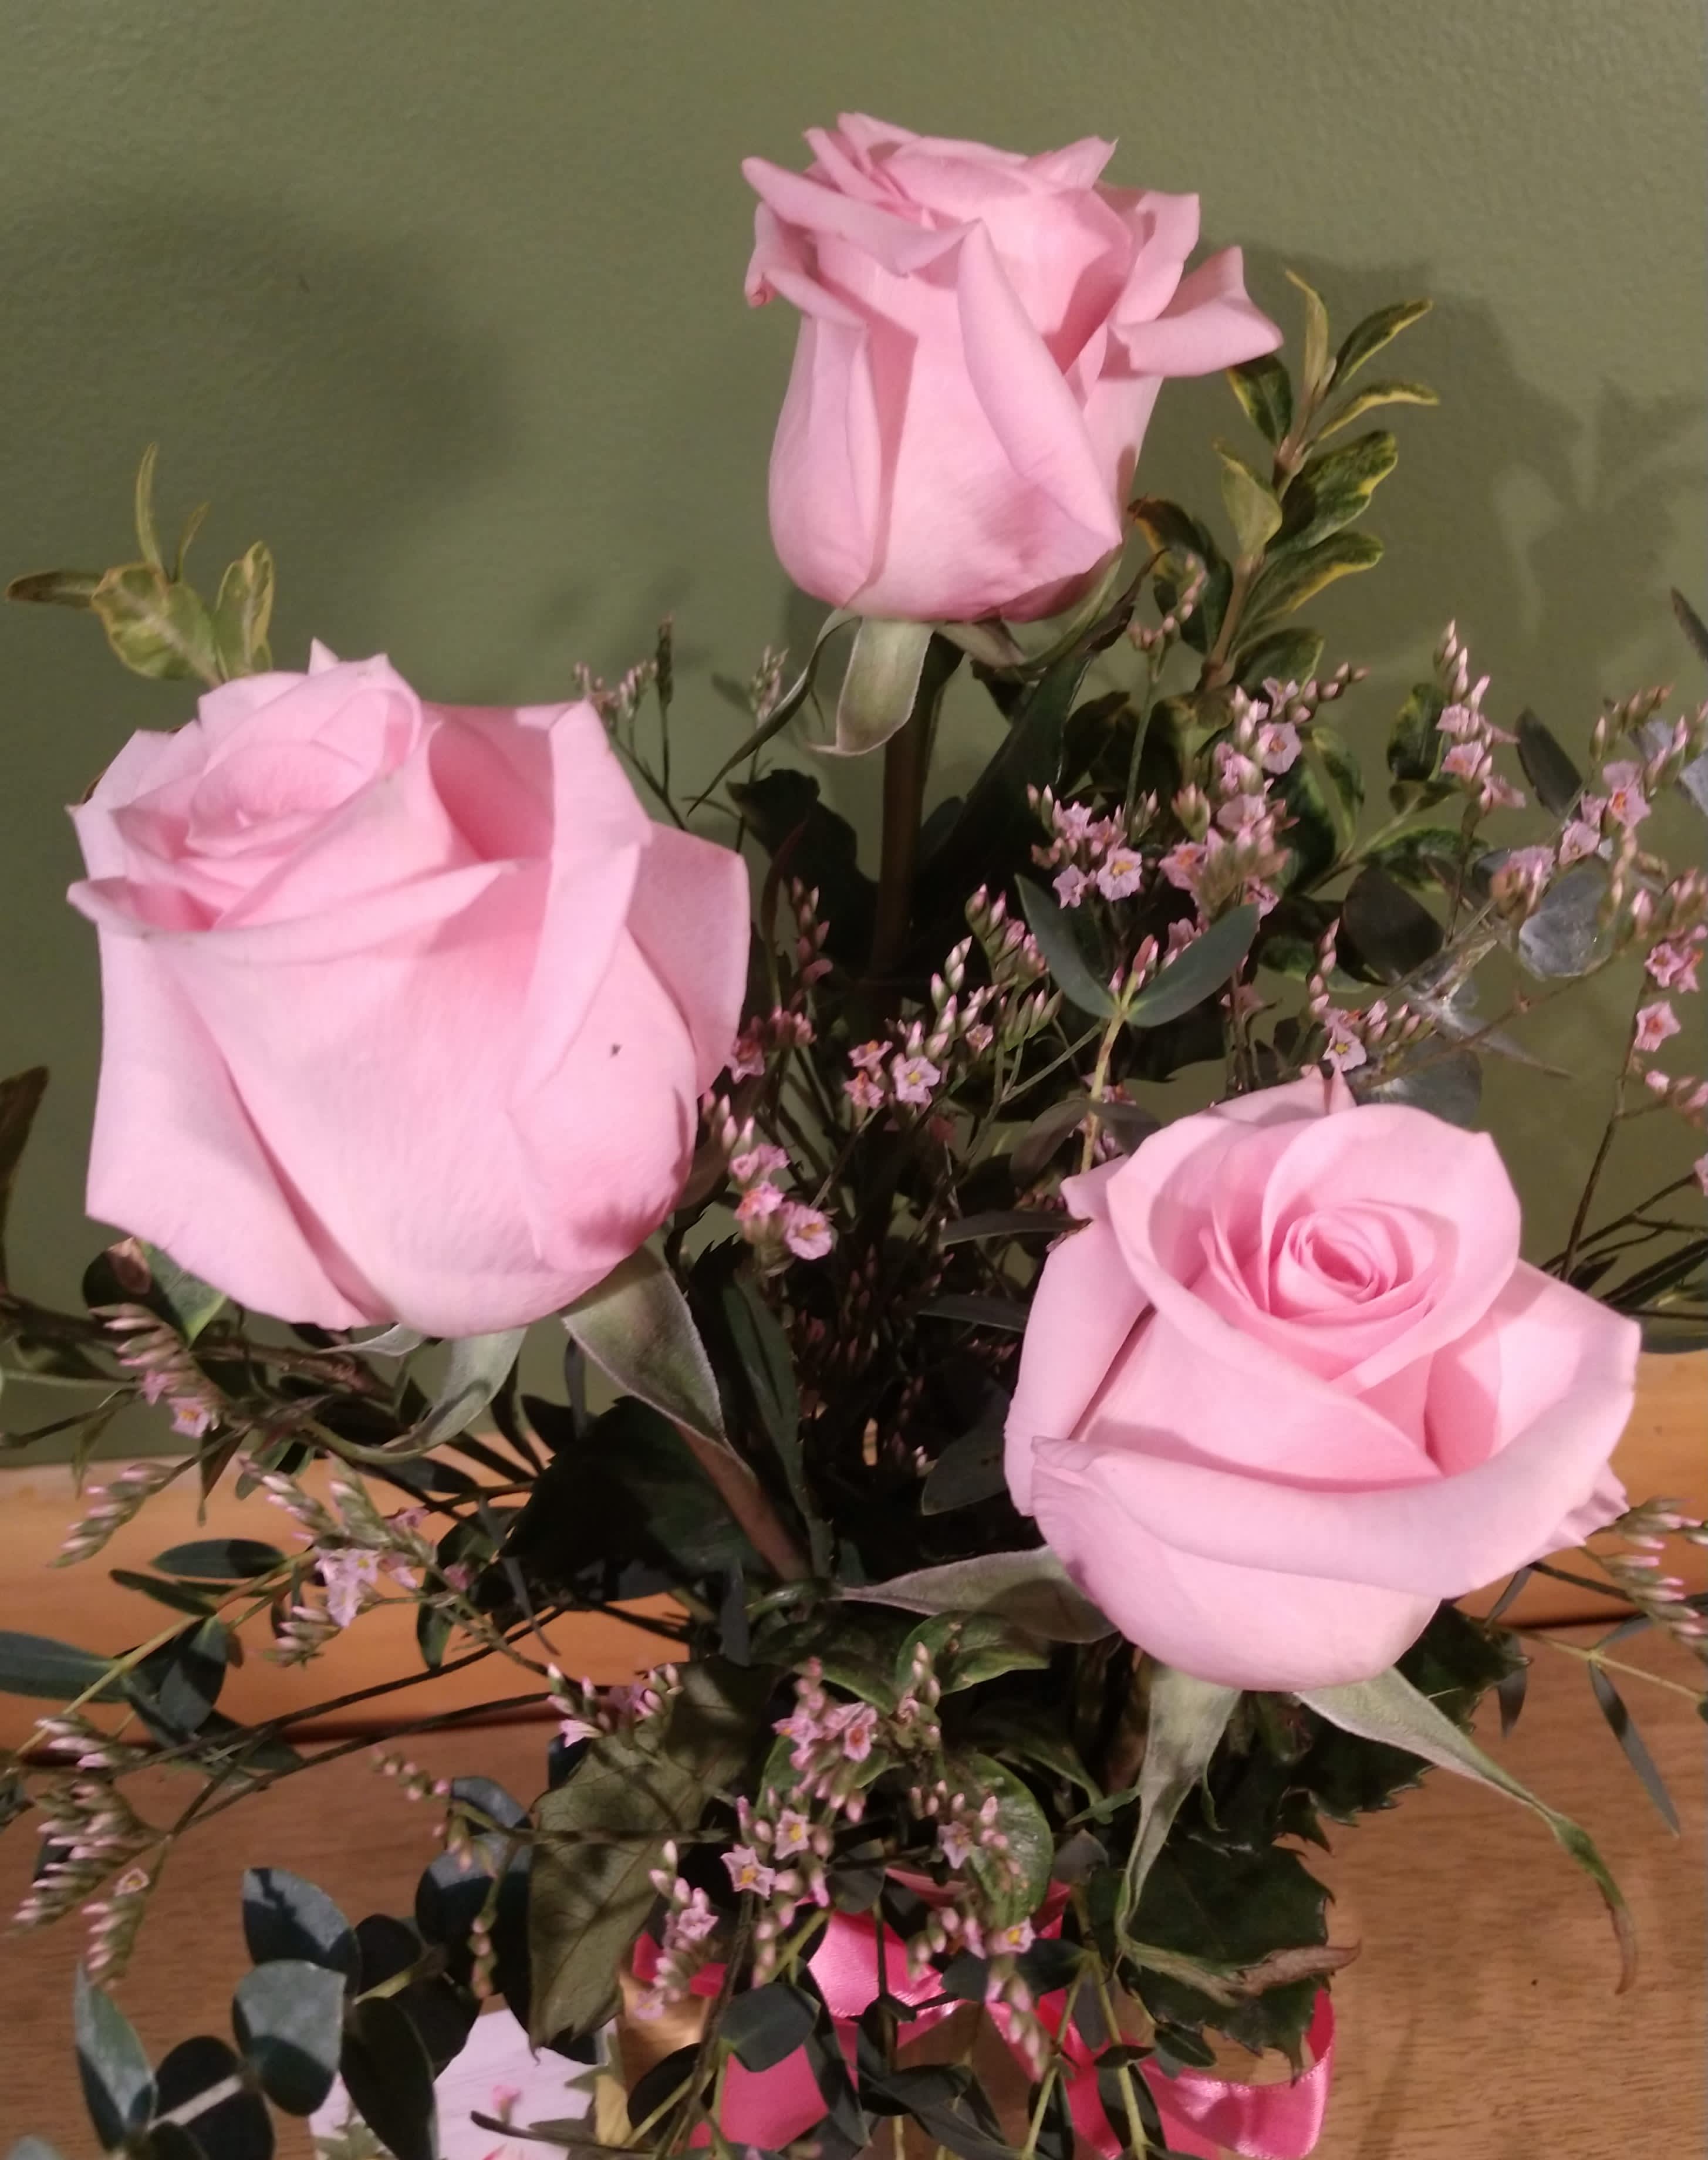 Pink Sweetness  - Say it sweeter with this feminine bouquet of pink roses and lush greens in a graceful glass vase.